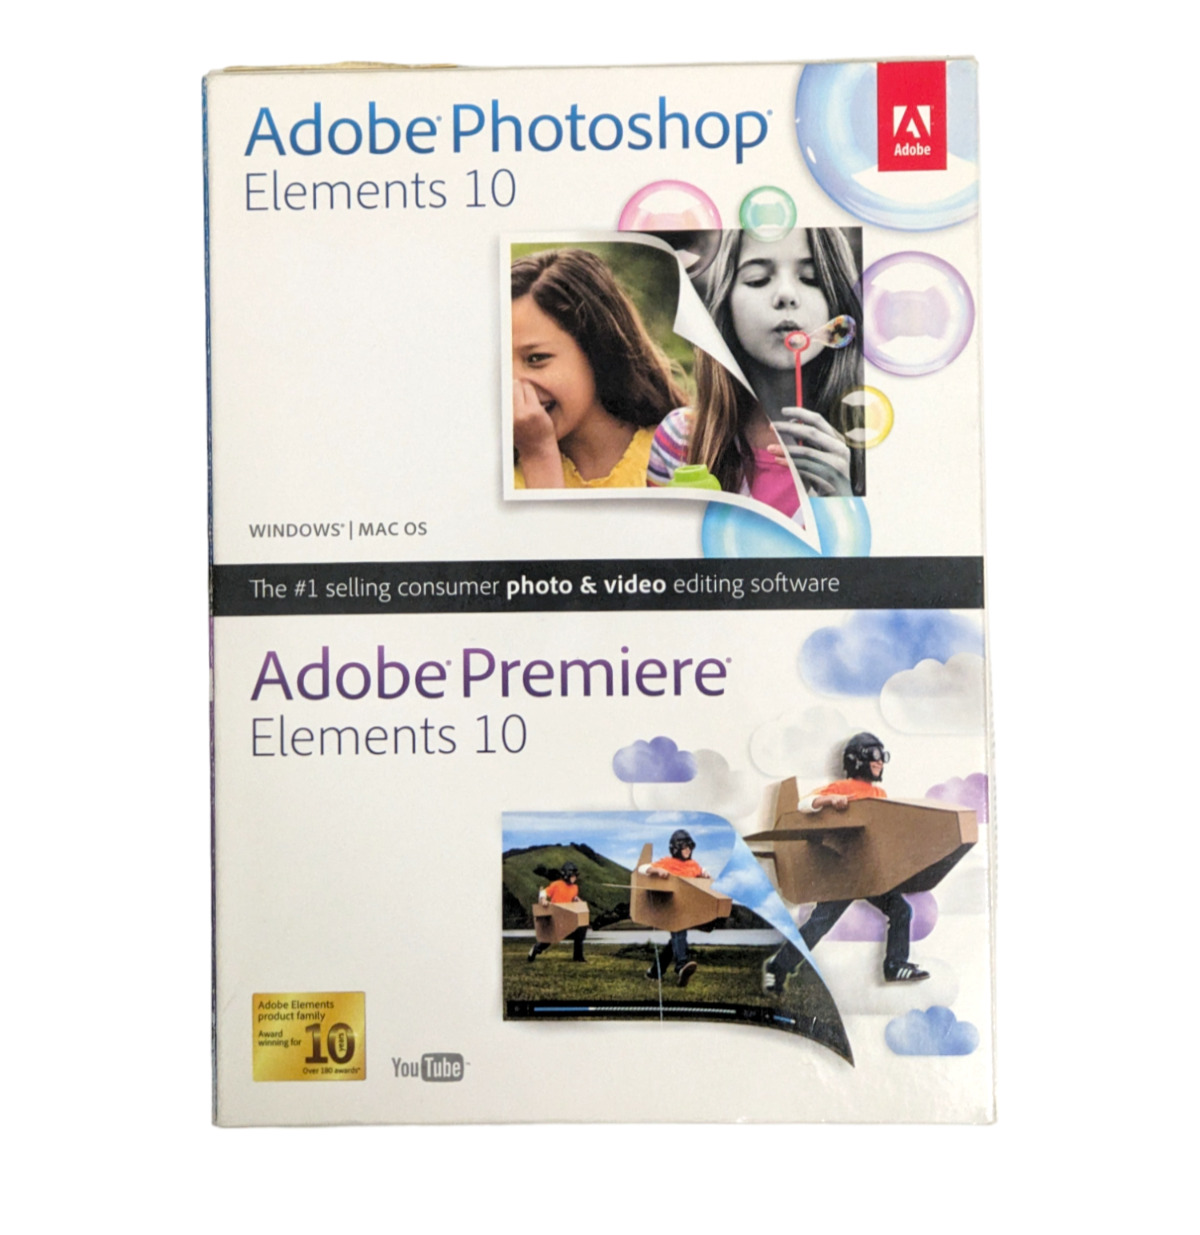 Adobe Photoshop Elements 10 And Premiere Elements 10 Win/Mac With Keys